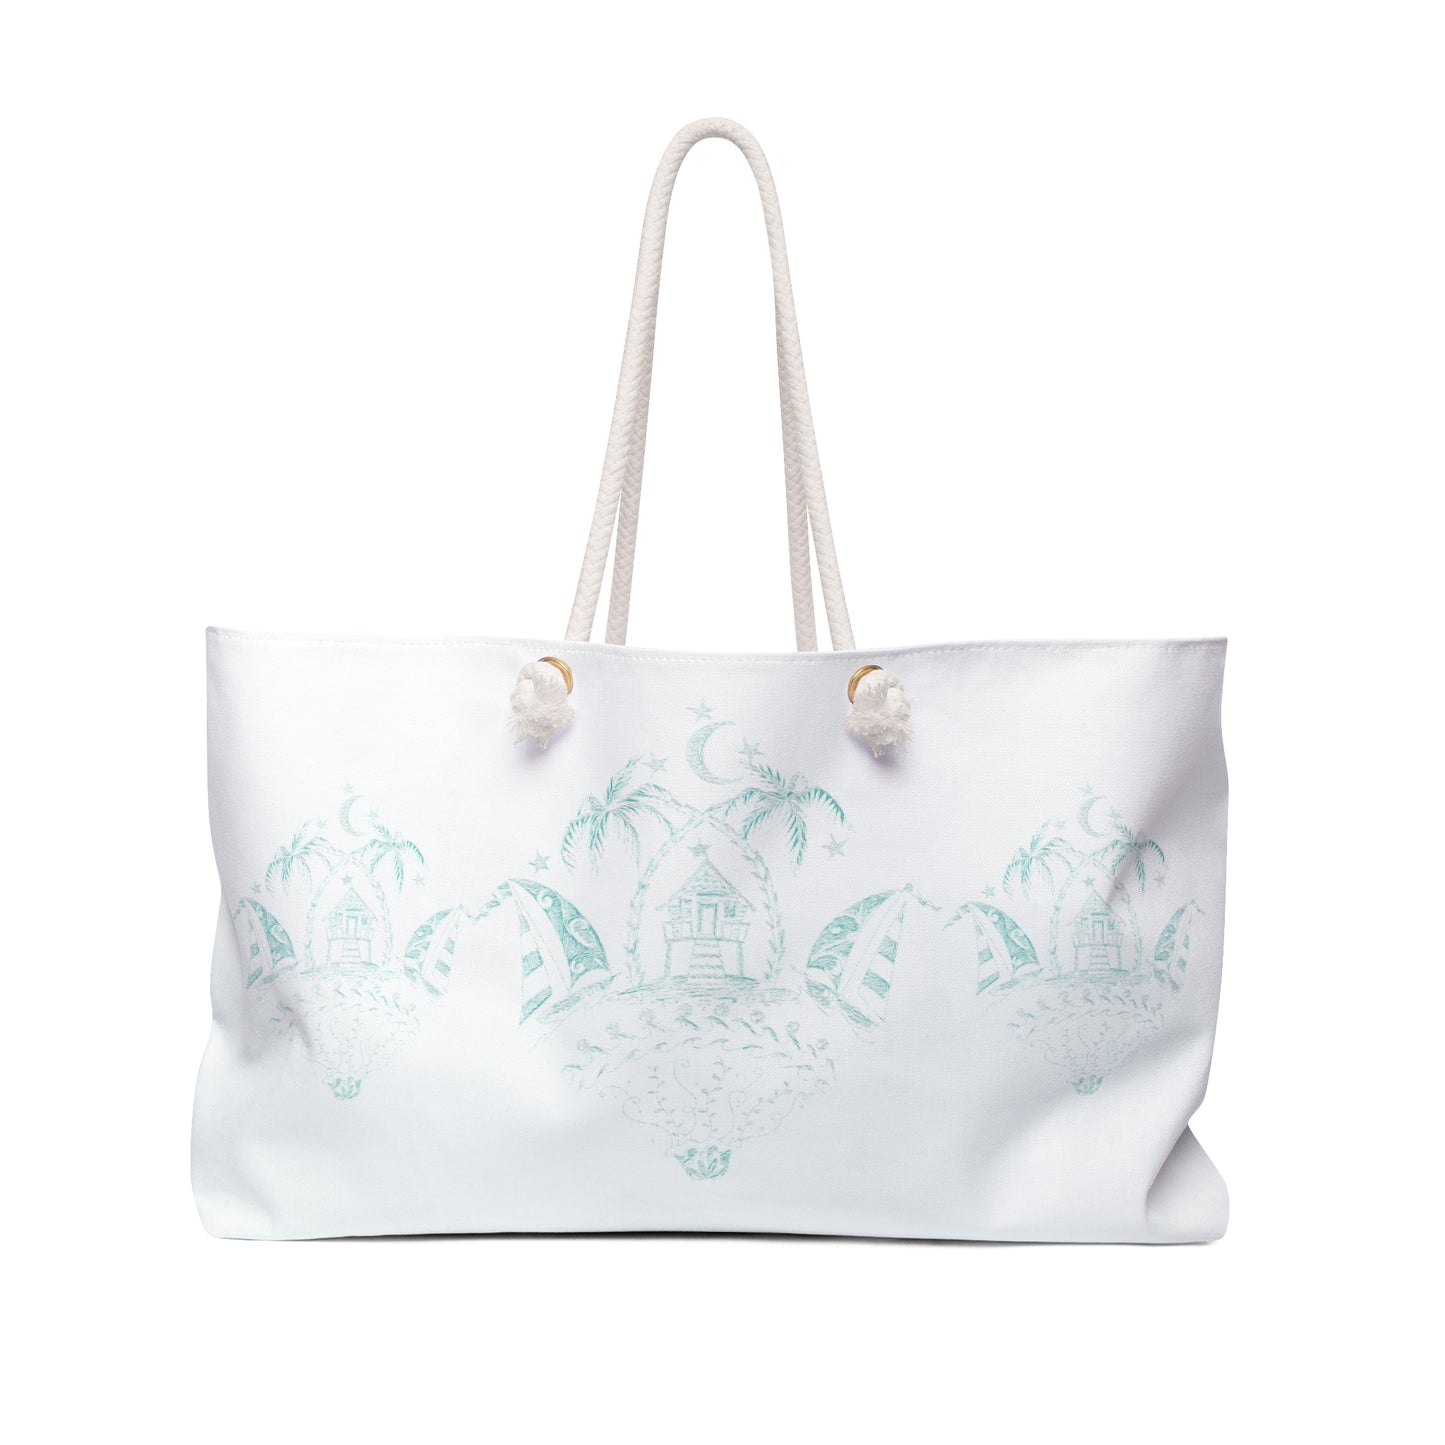 Beach Bungalow on White Weekender Bag from Talula Land